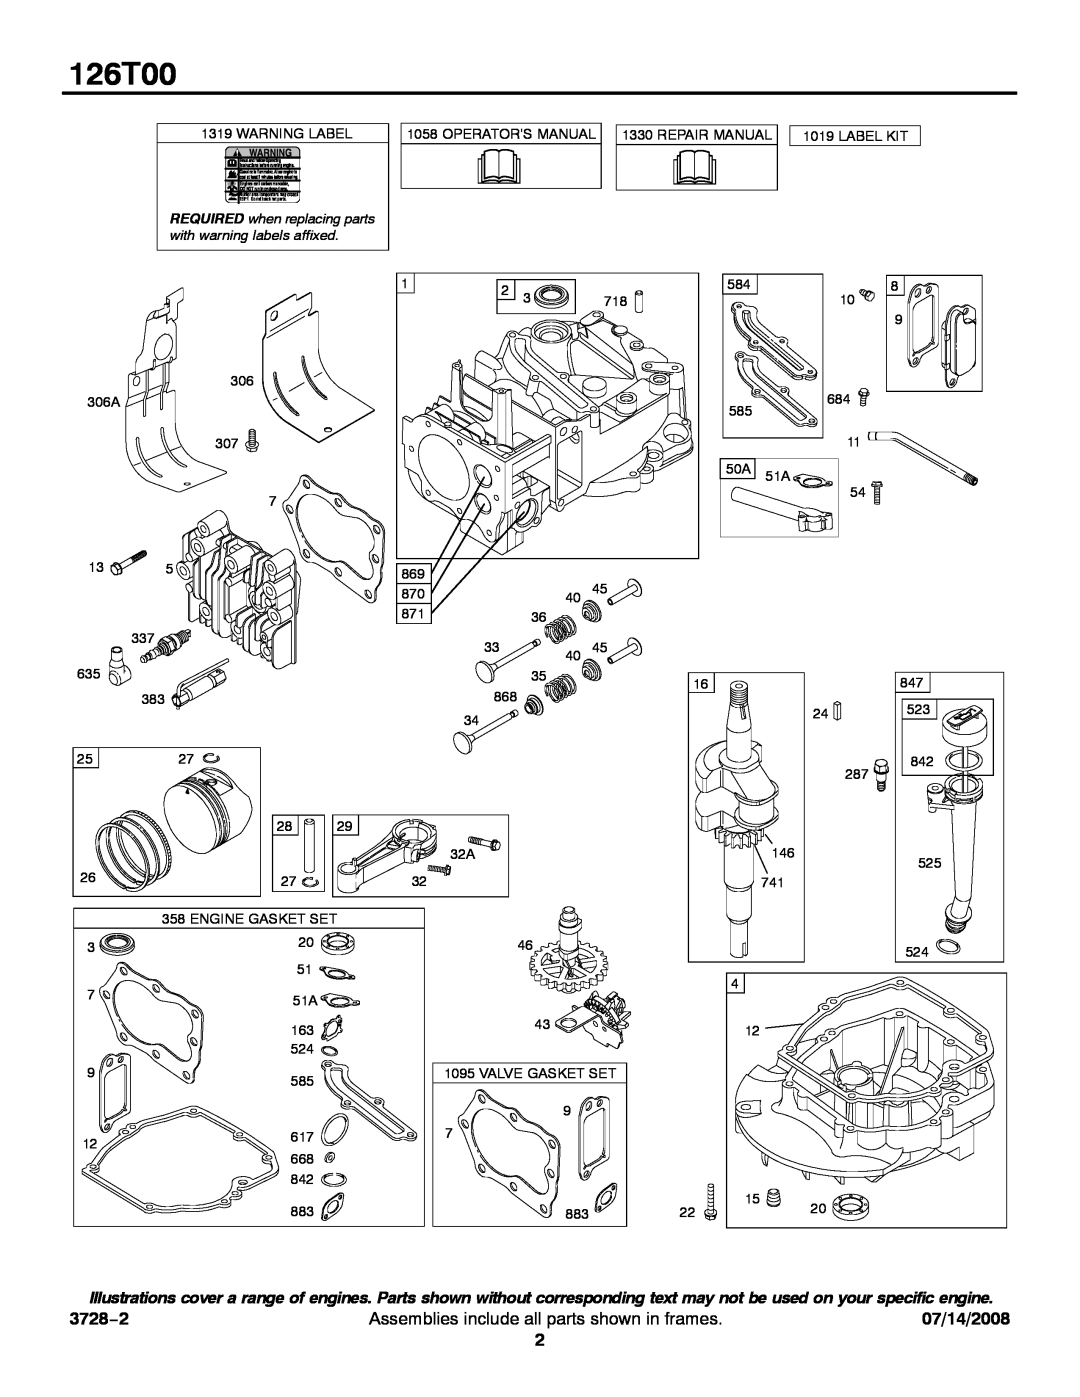 Snapper 126T00 service manual 3728−2, Assemblies include all parts shown in frames, 07/14/2008 